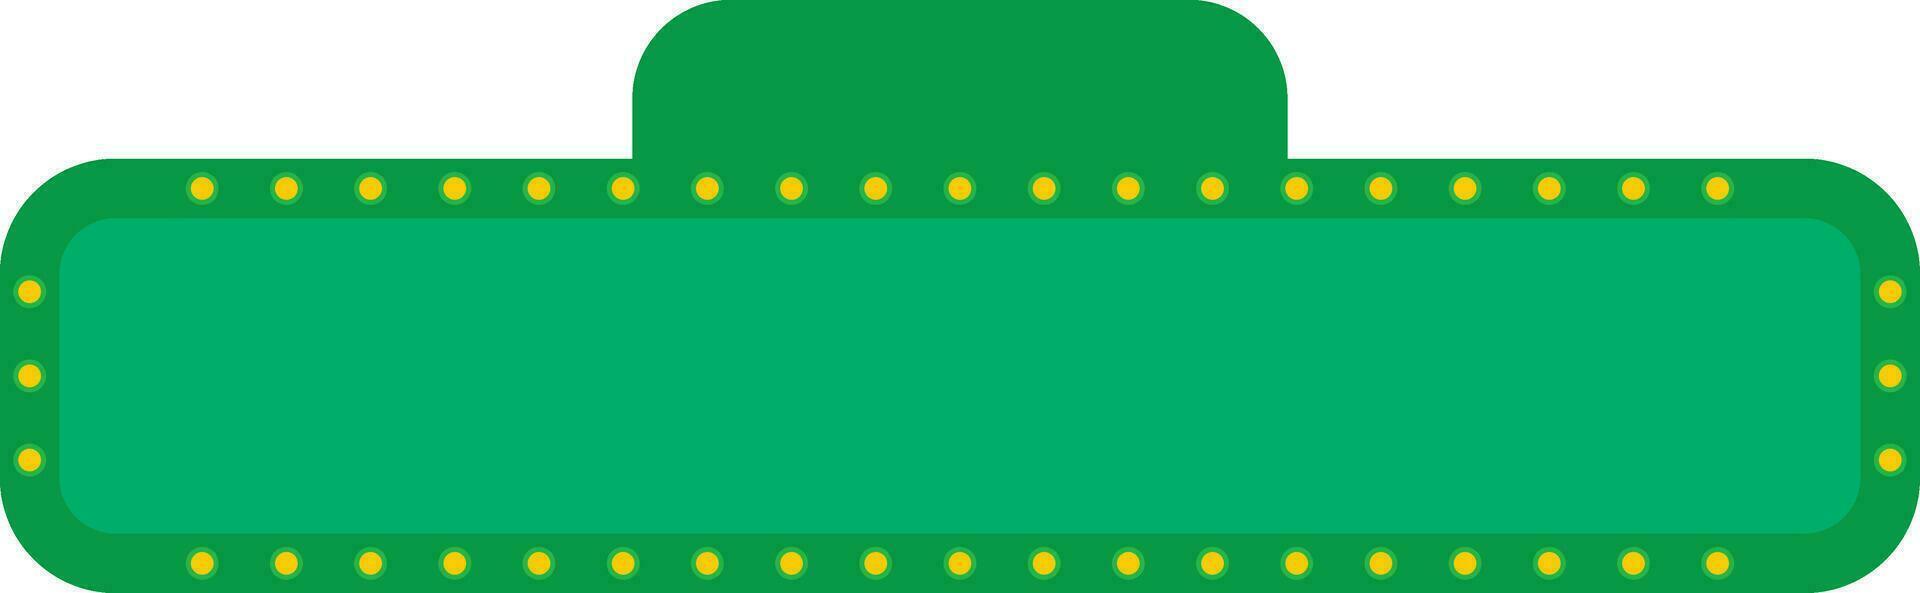 Green Theme with Yellow Button Text Frame vector